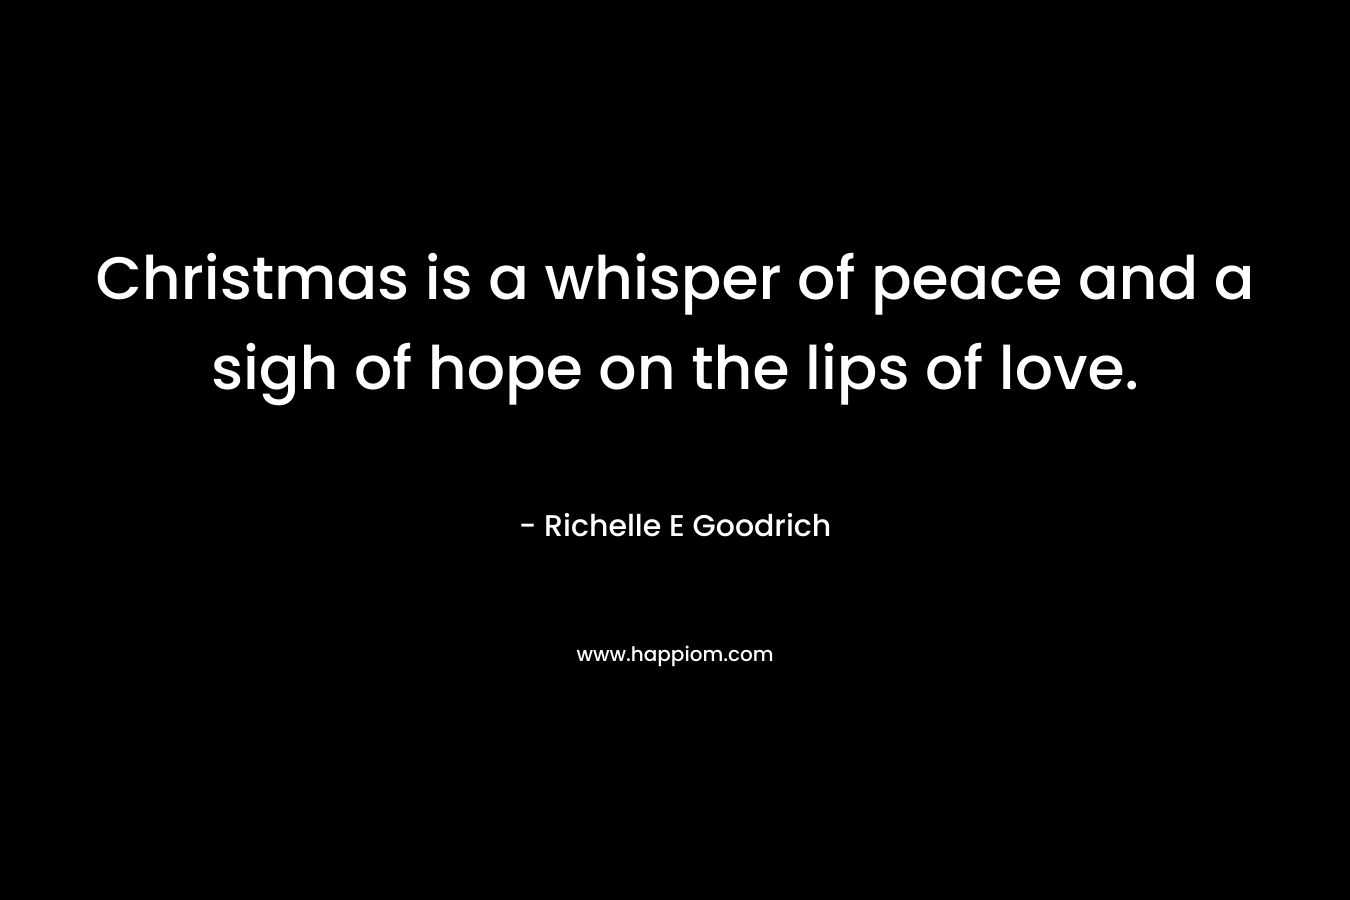 Christmas is a whisper of peace and a sigh of hope on the lips of love.